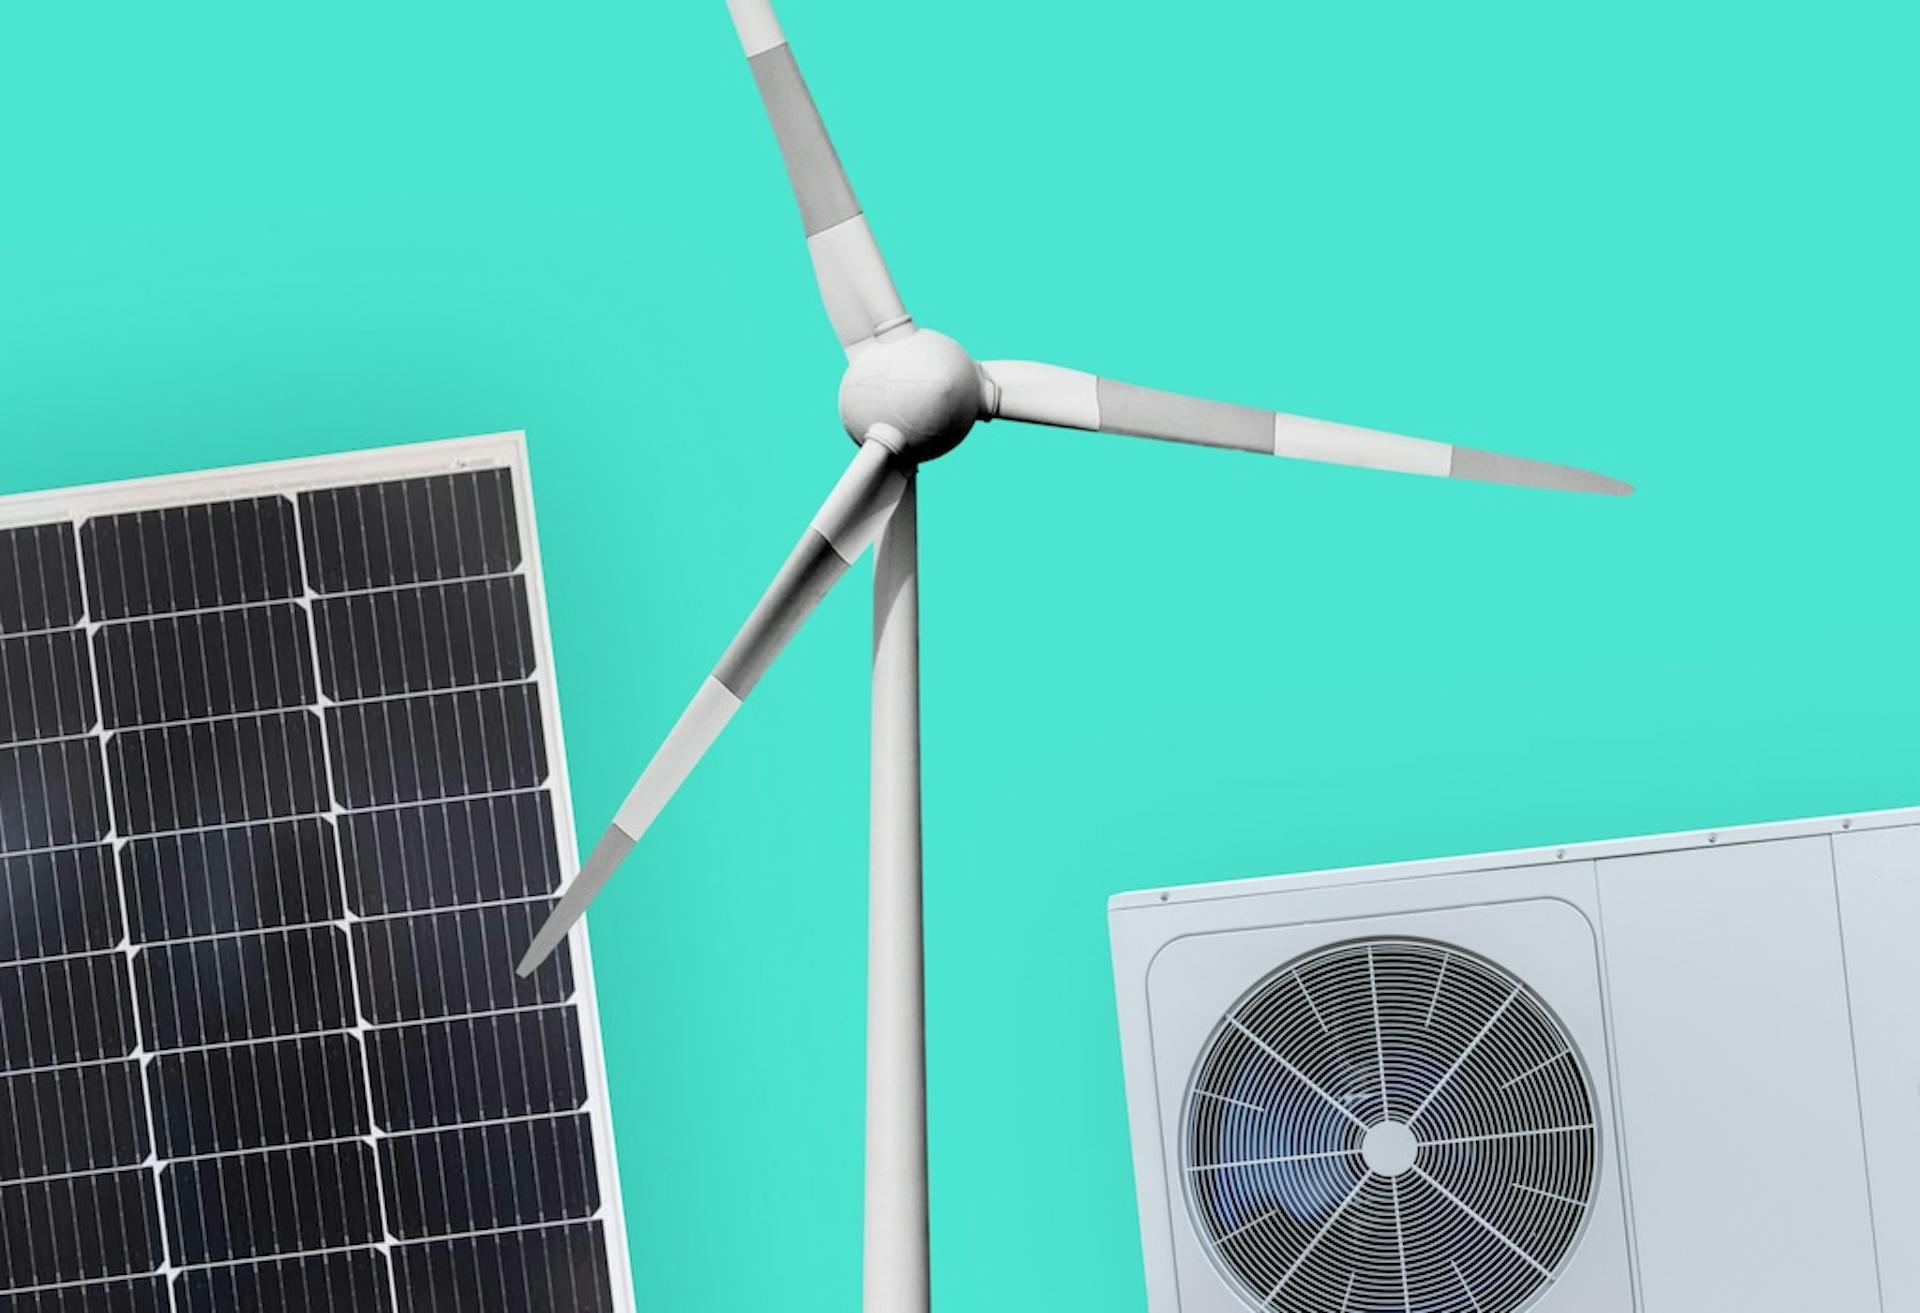 A black solar panel, a wind turbine, and an air source heat pump (with a turquoise background)